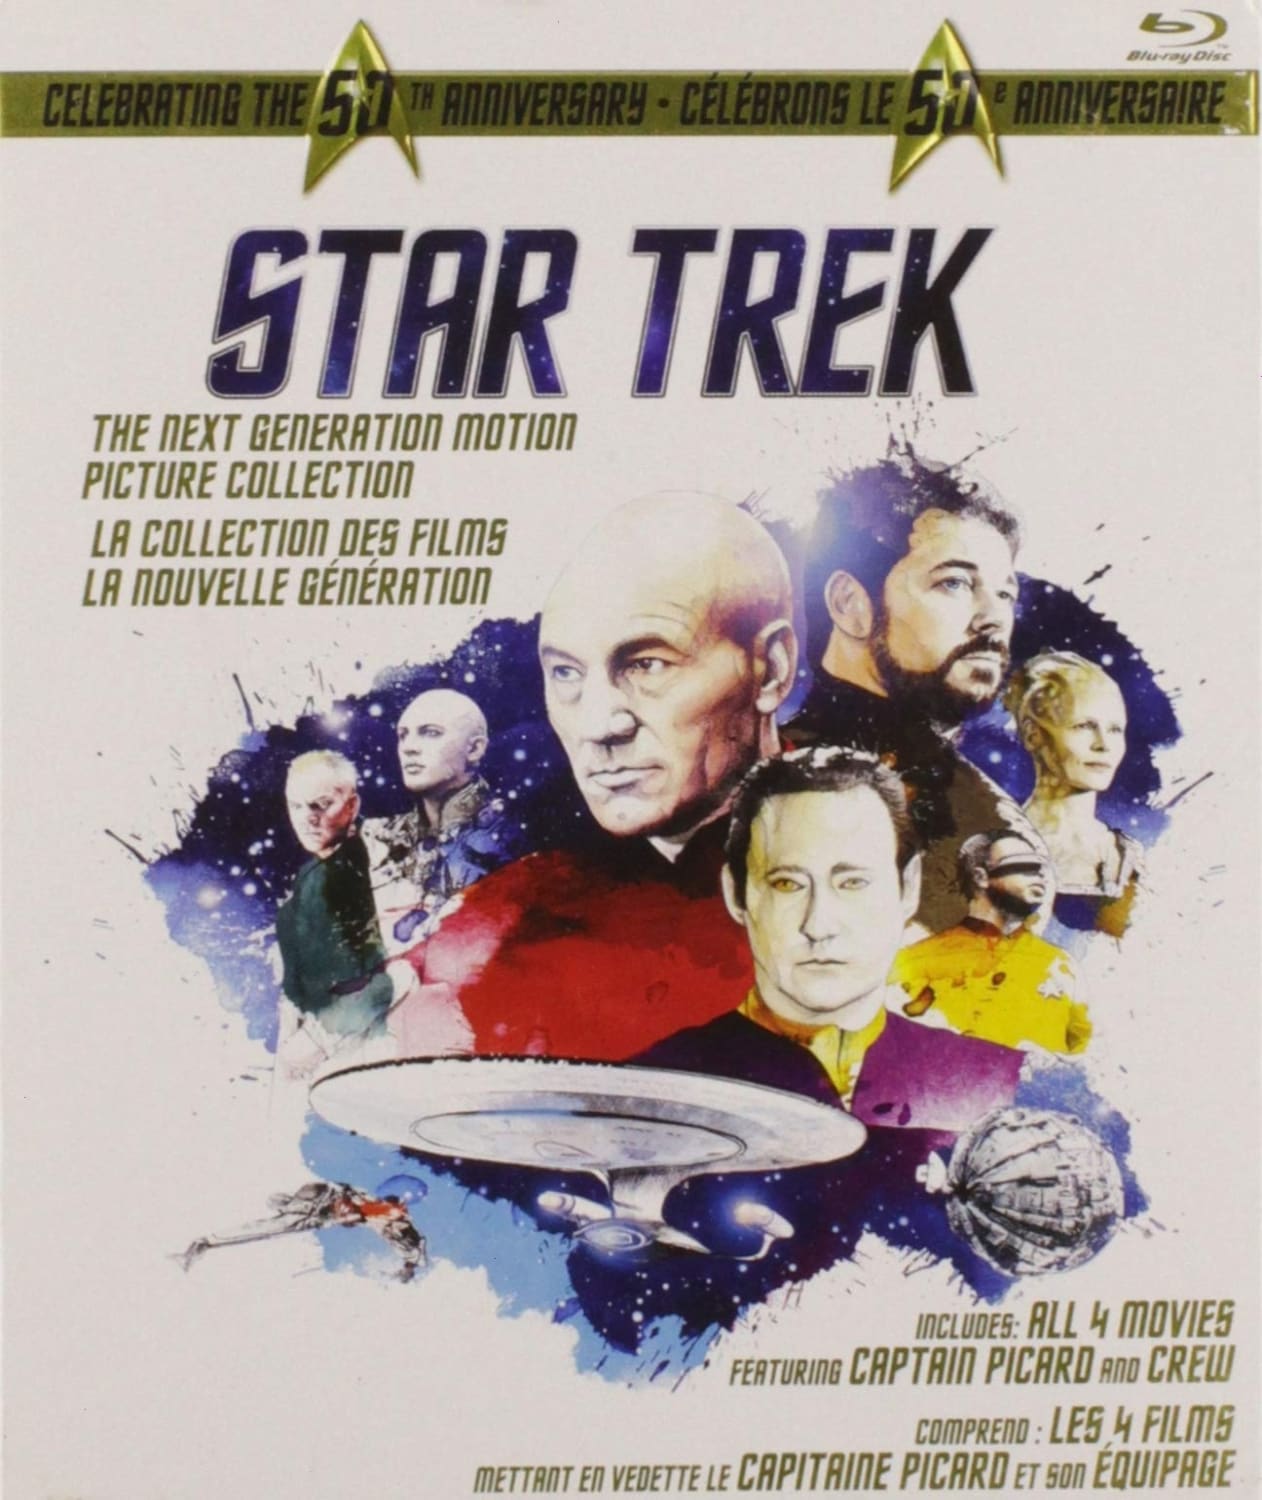 Star Trek – The Next Generation Motion Picture Collection (Blu-ray) (Bilingual)